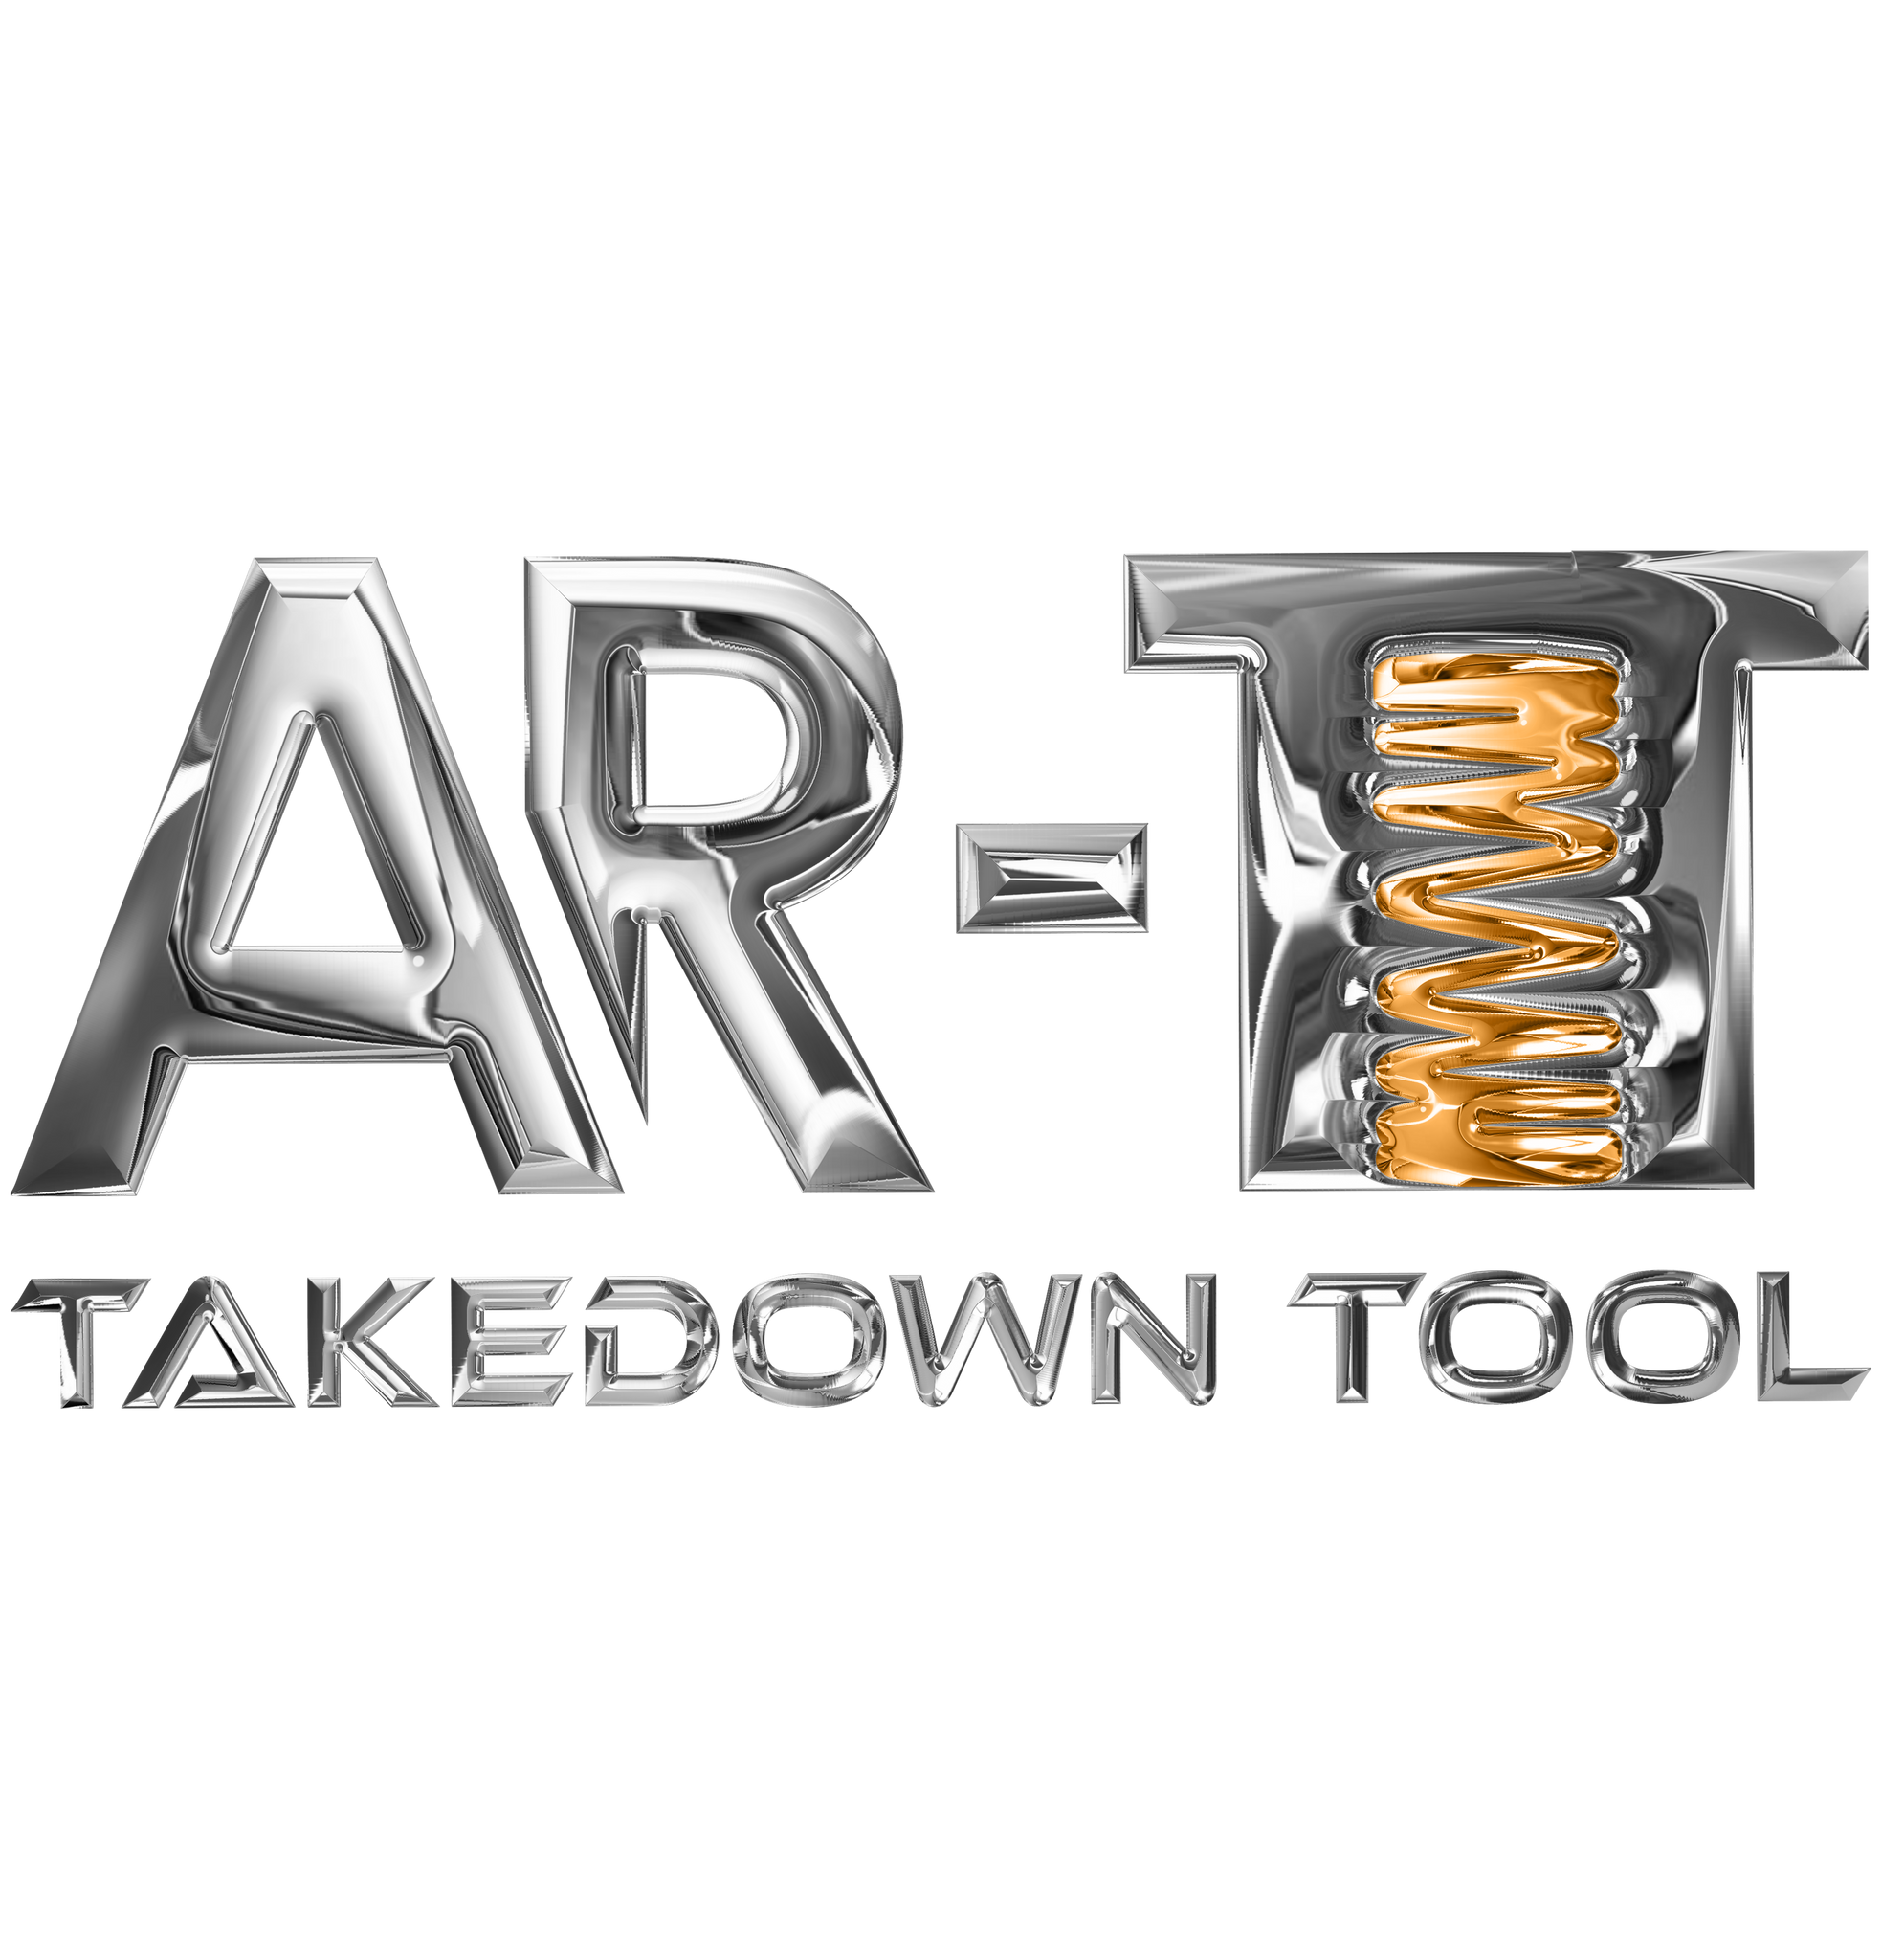 What is AN AR-Takedown Tool? What is The Takedown Tool line?